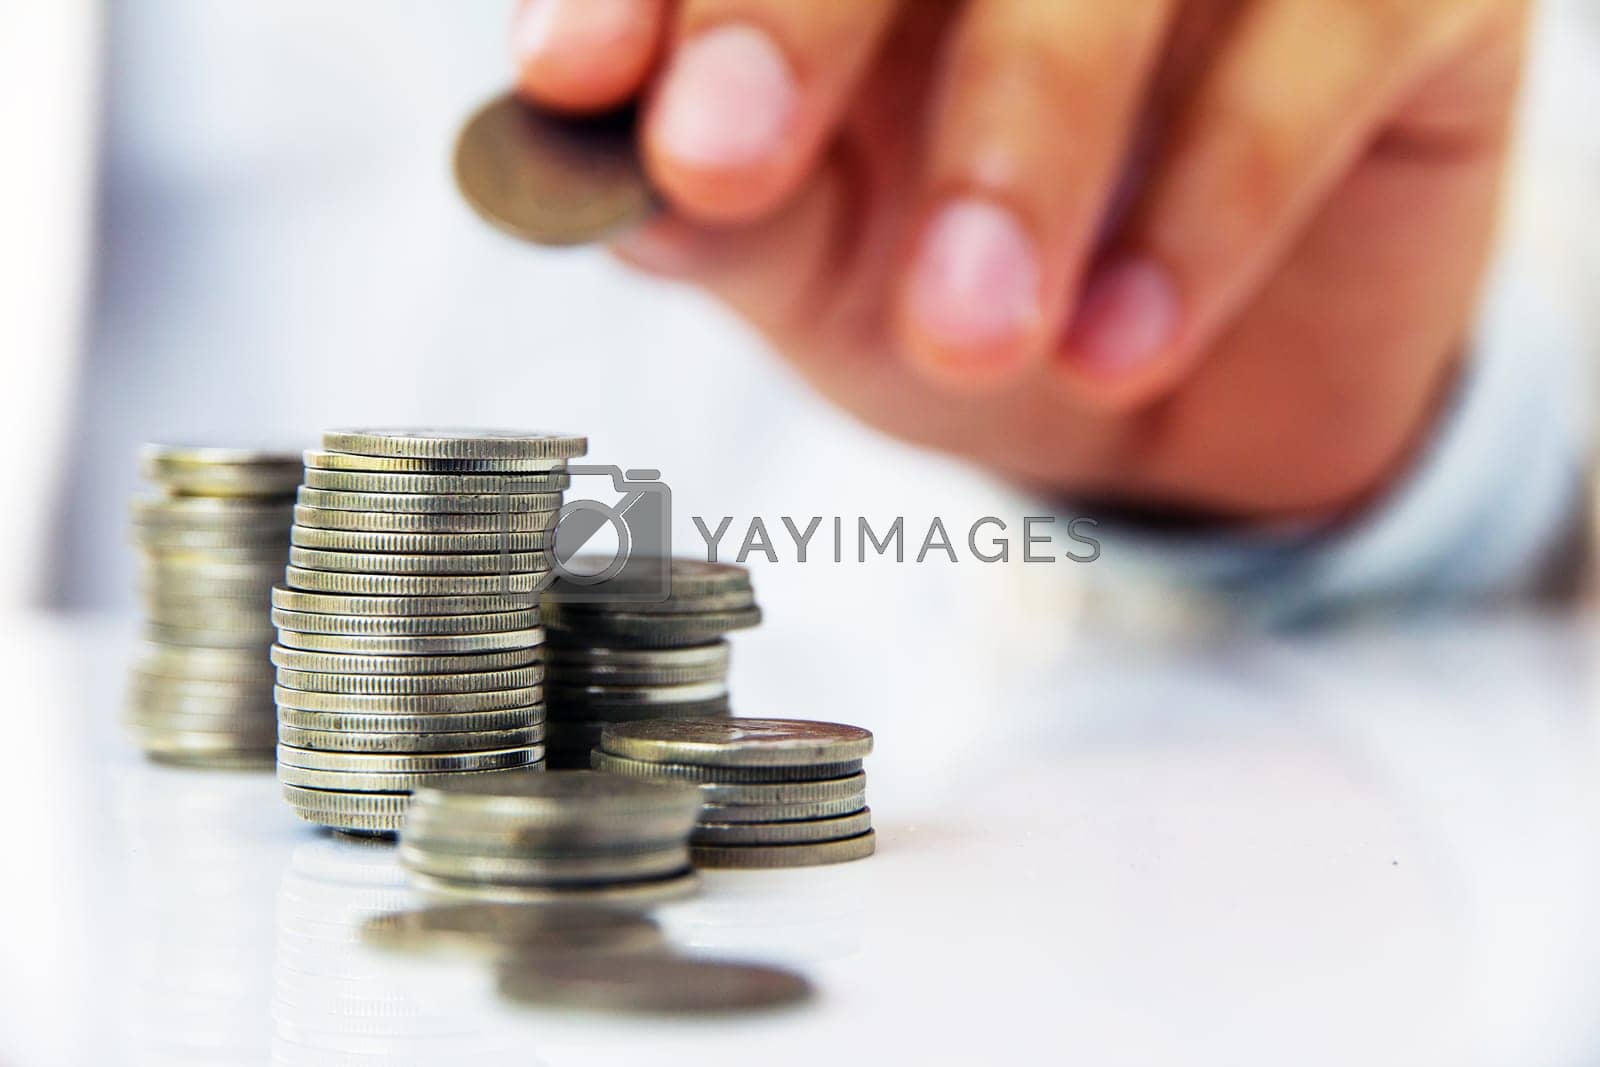 Royalty free image of investment concept by ponsulak